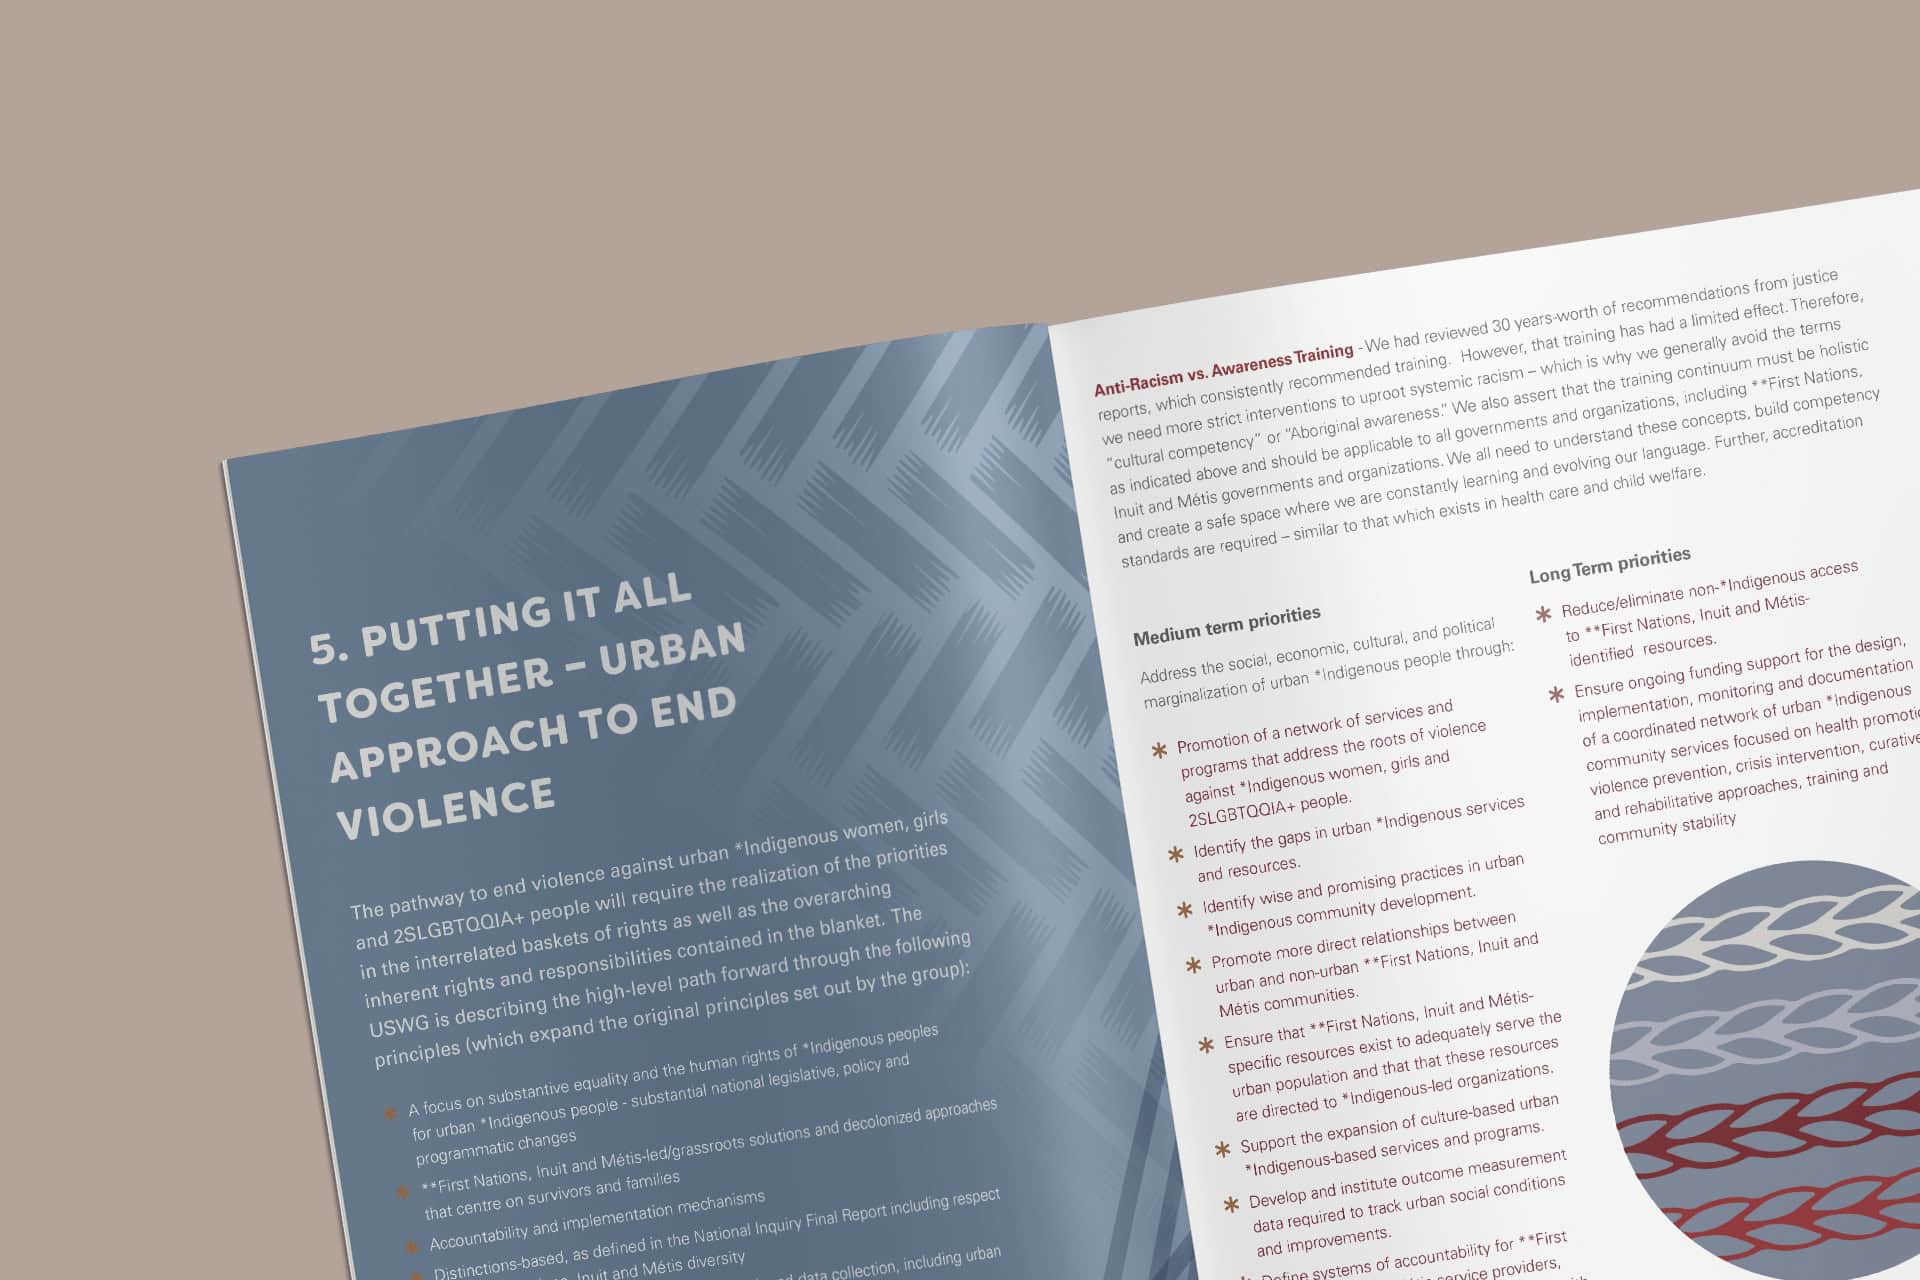 An internal spread of the MMIWG and 2SLGBTQQIA+ Urban Chapter for the National Action Plan. The spread features section 5 - Putting it all together - urban approach to end violence.